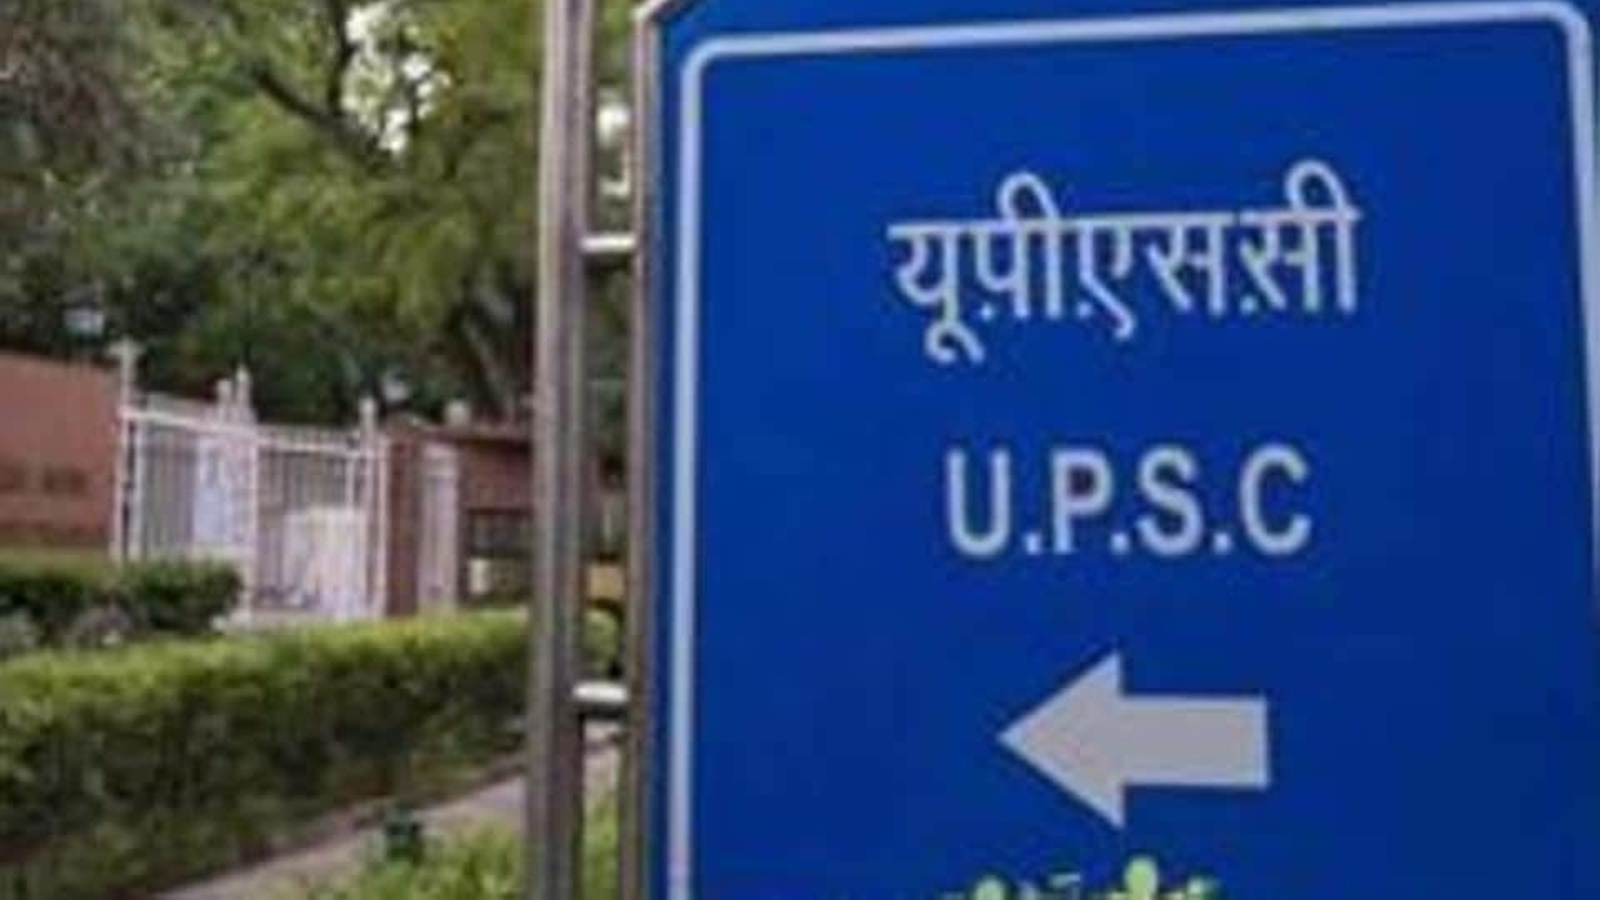 UPSC CAPF AC exam admit card 2021 released at upsc.gov.in, direct link